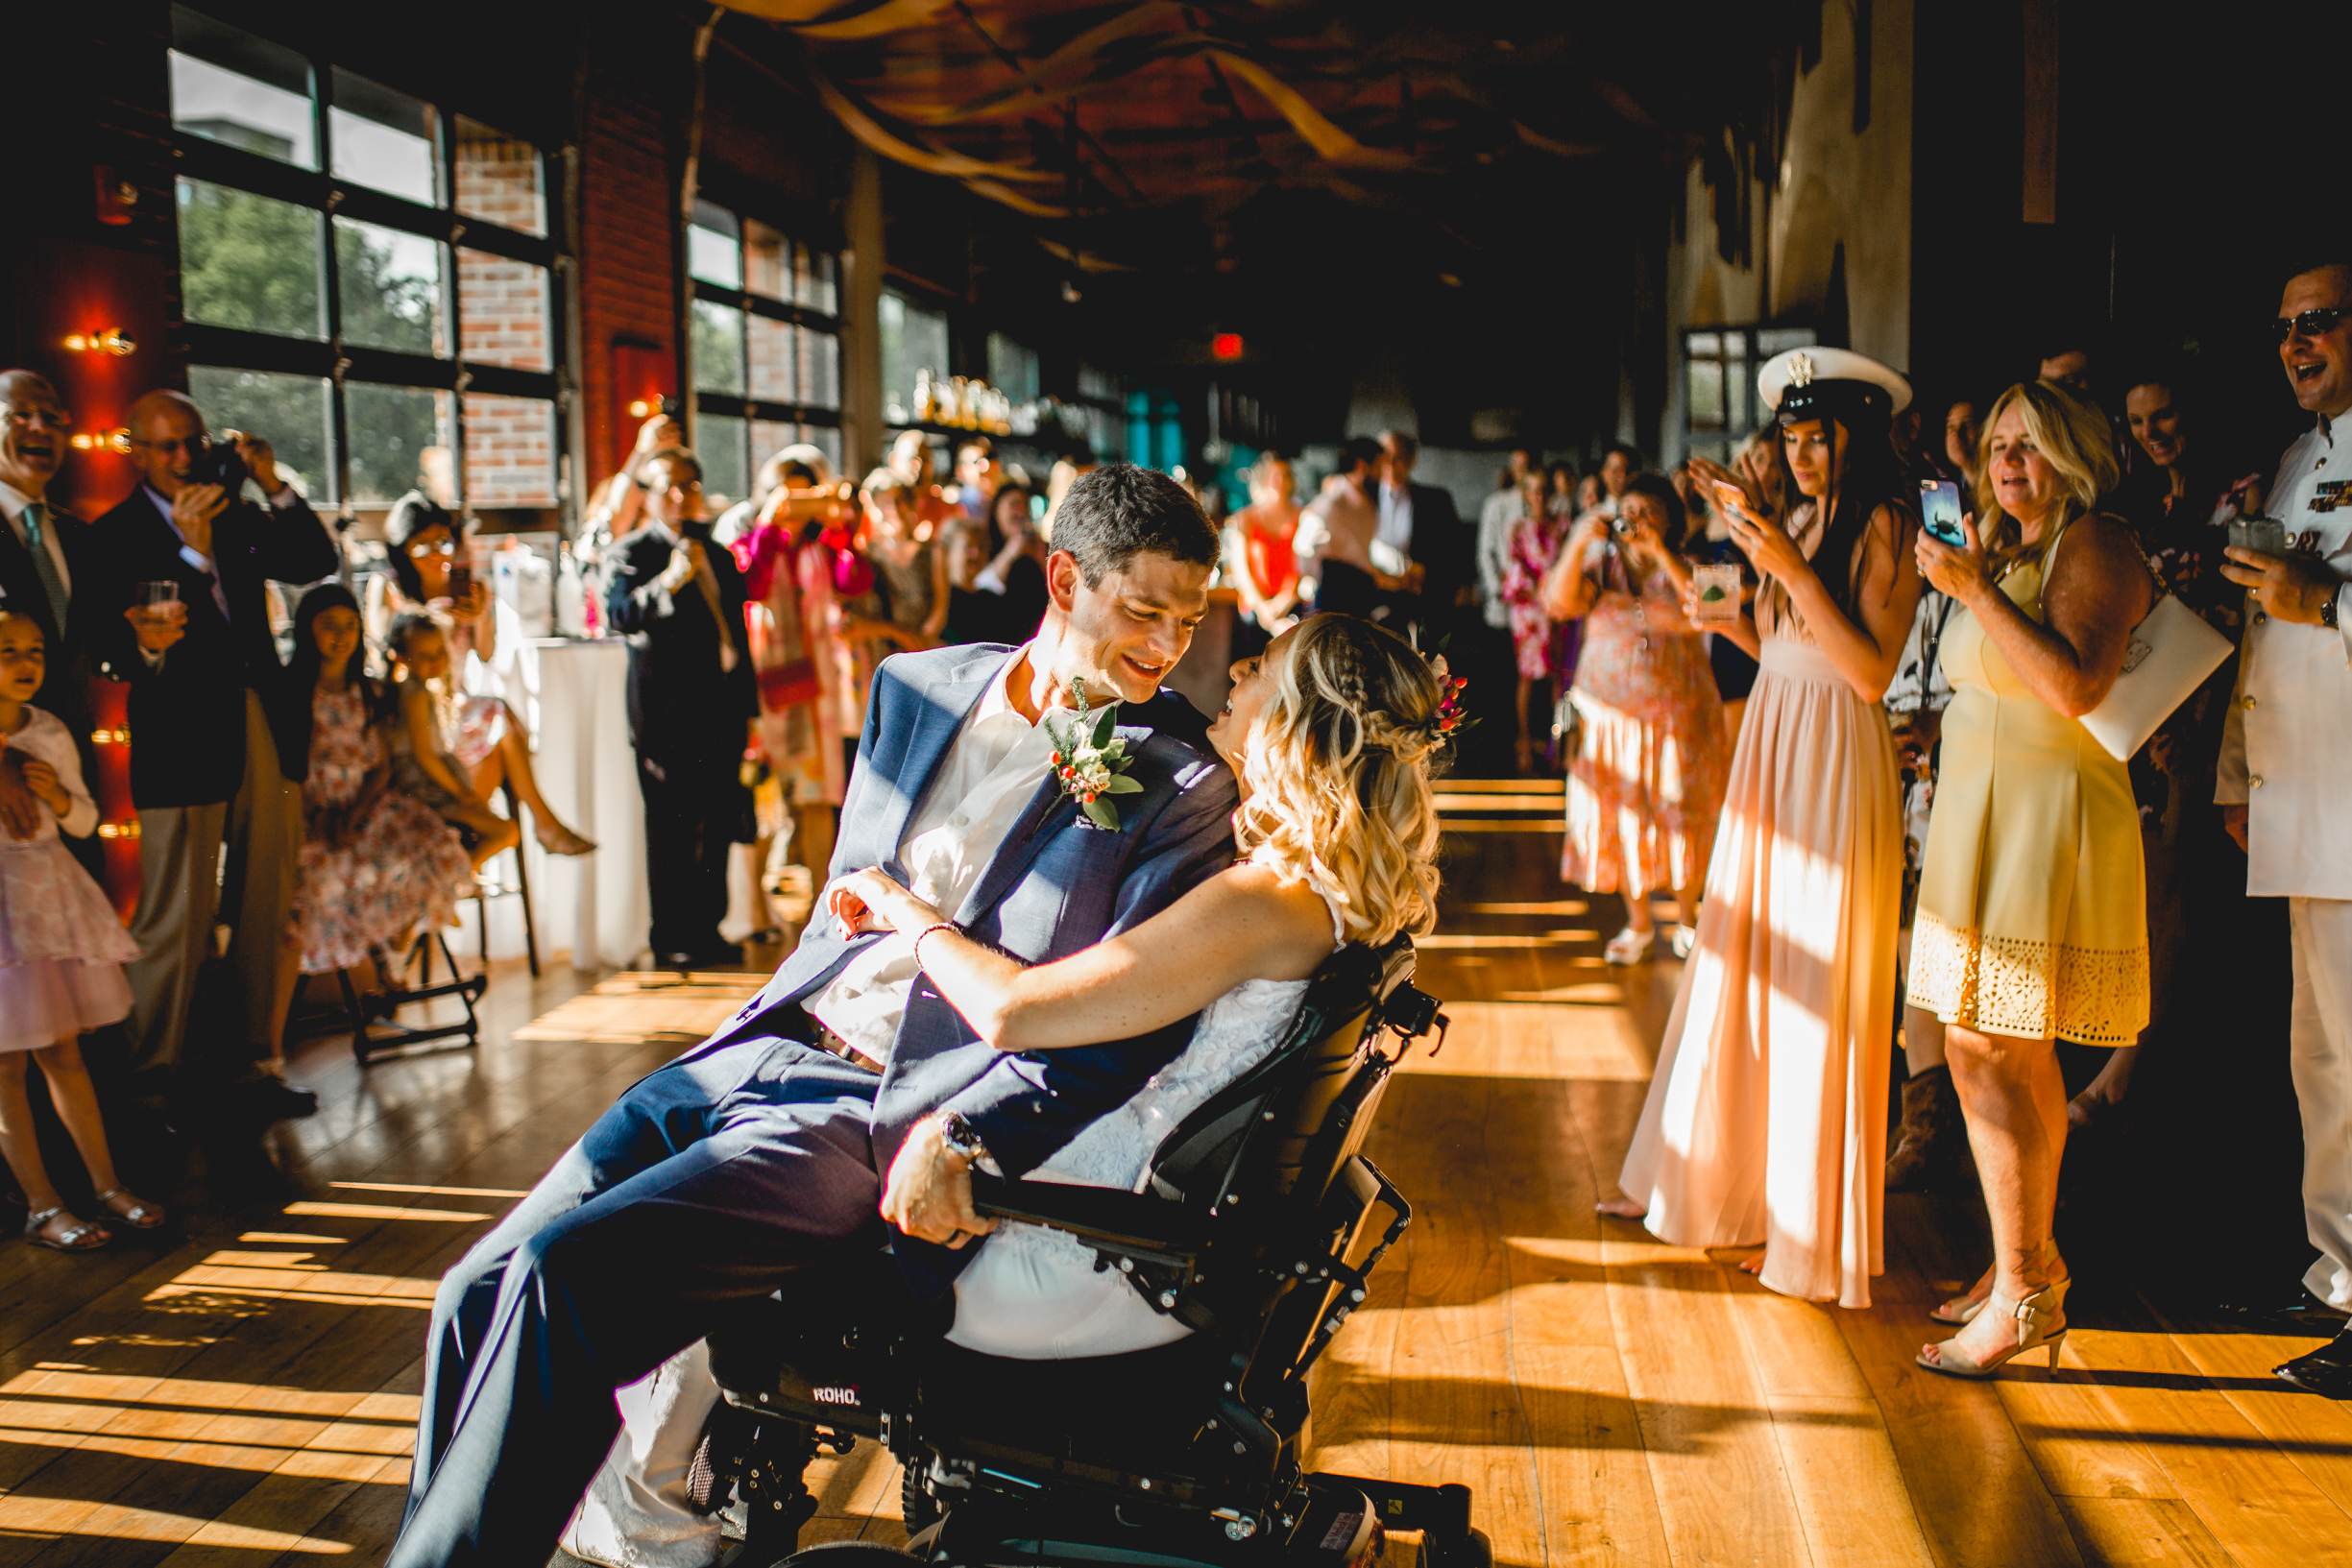 Paralyzed woman on her wedding day - BEHIND THE SCENES: From the ICU to Walking Down the Aisle